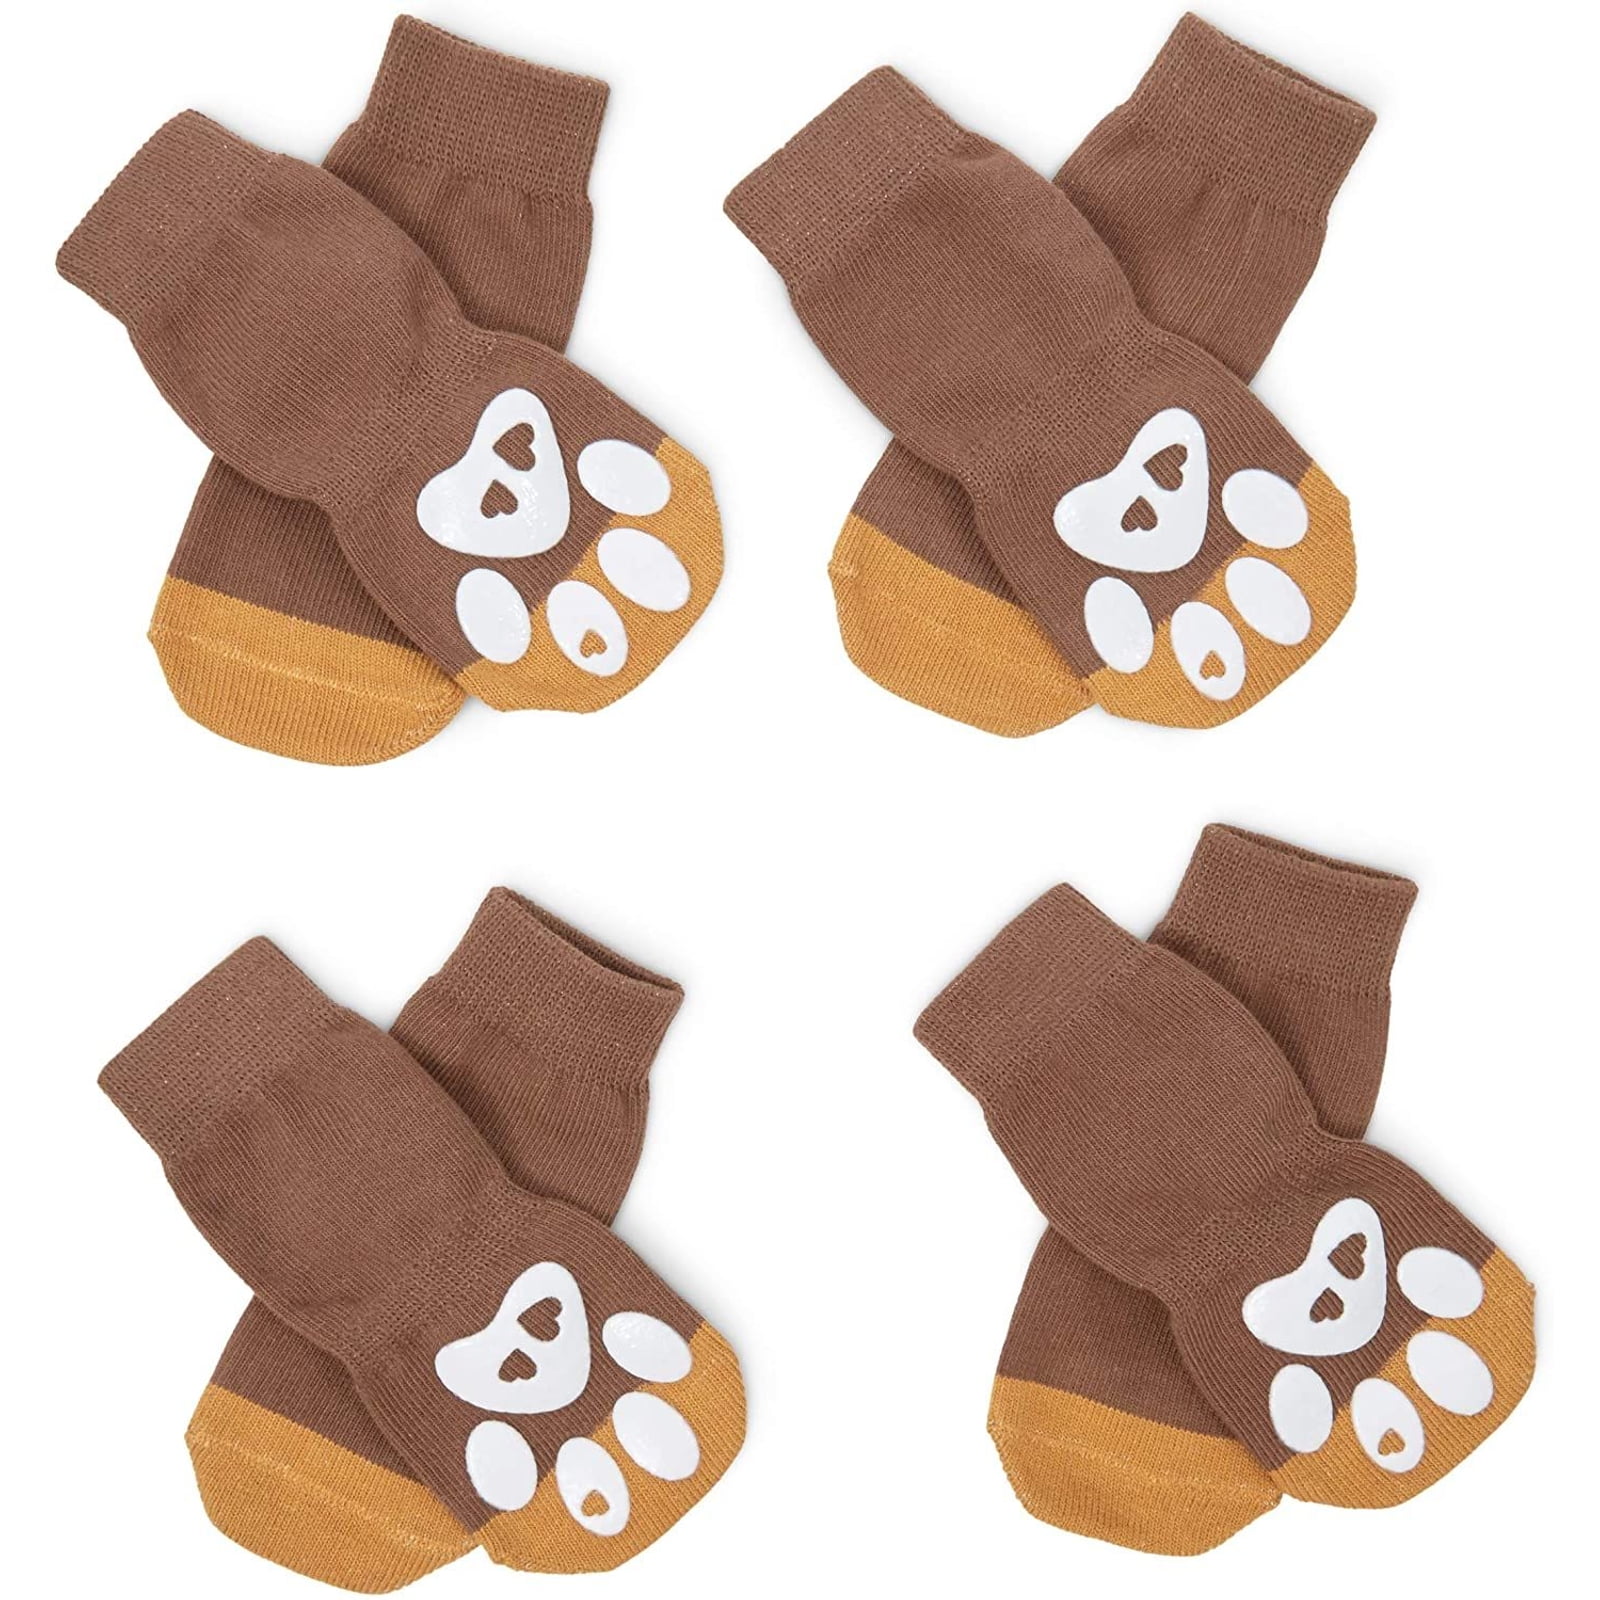 Small Dog Paw Socks for Hardwood Floors 4 Pairs, 8 Pieces Total 